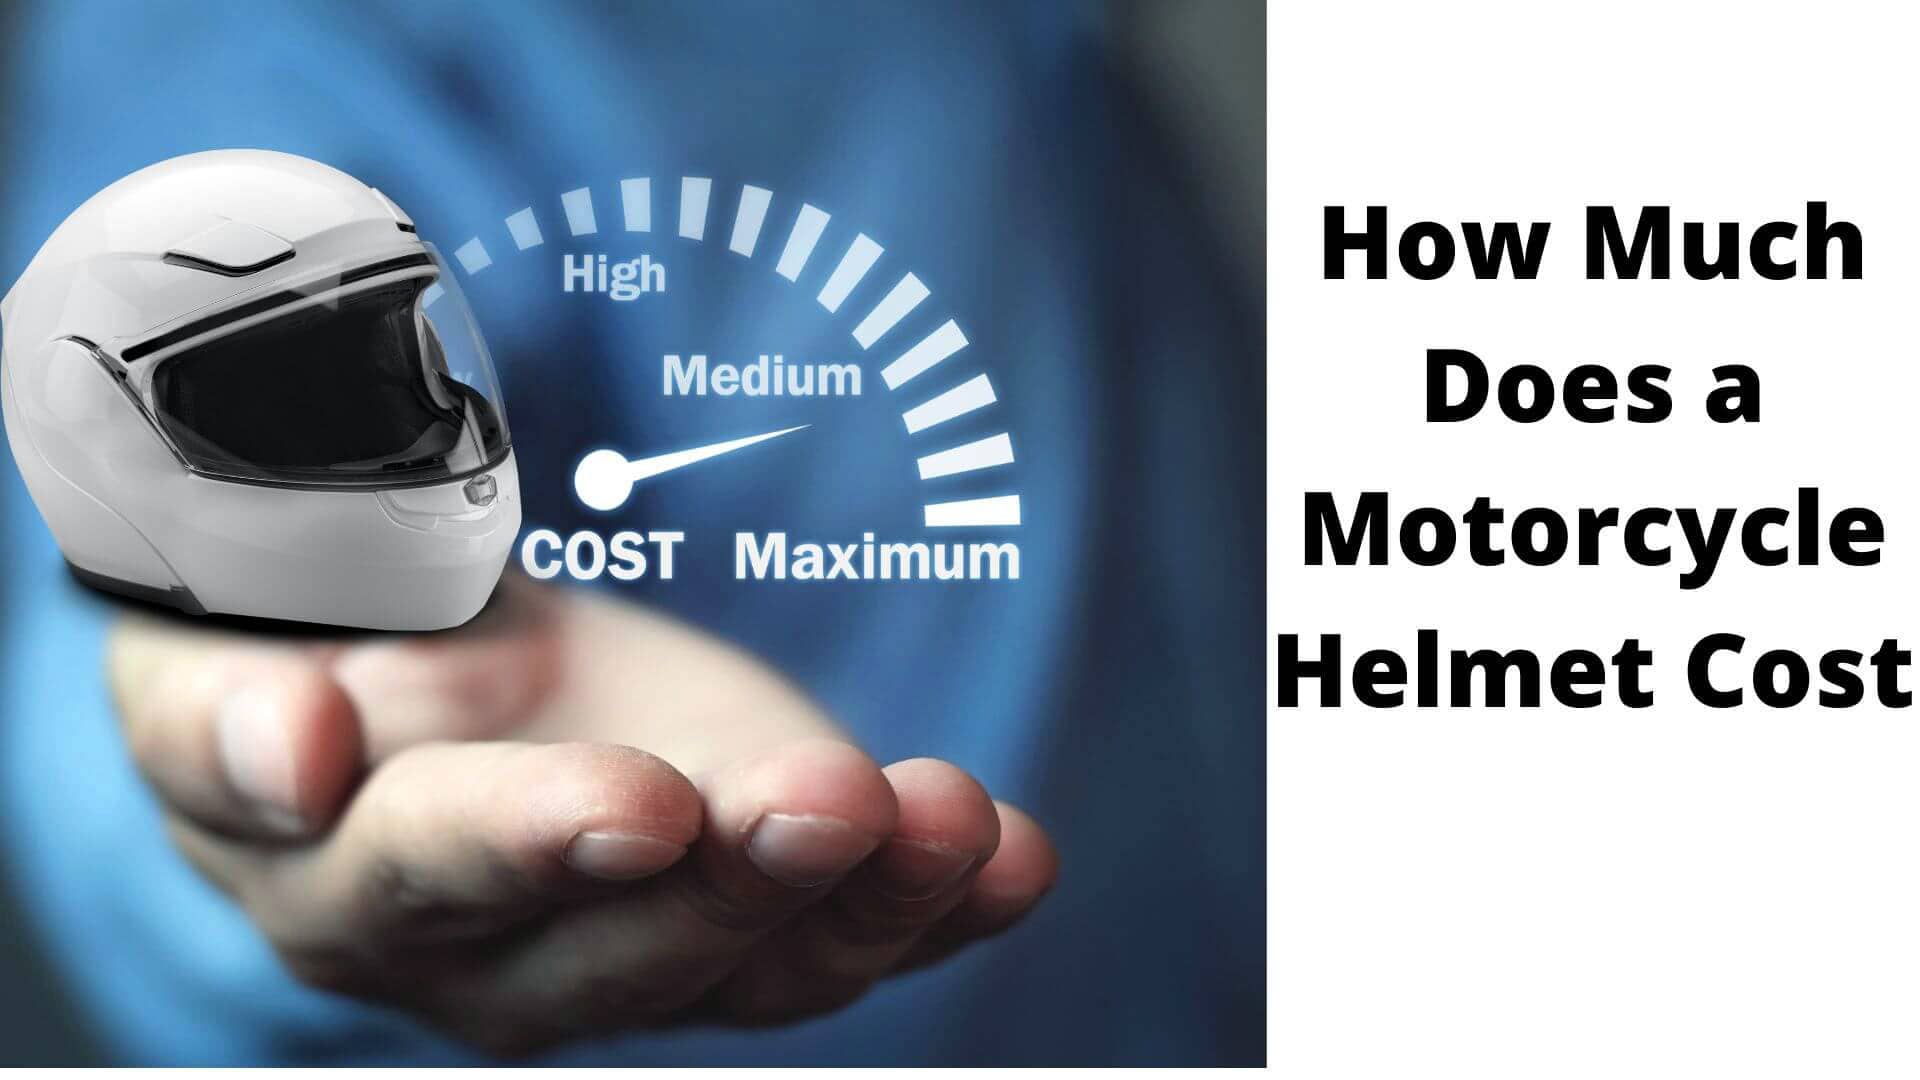 How Much Does a Motorcycle Helmet Cost